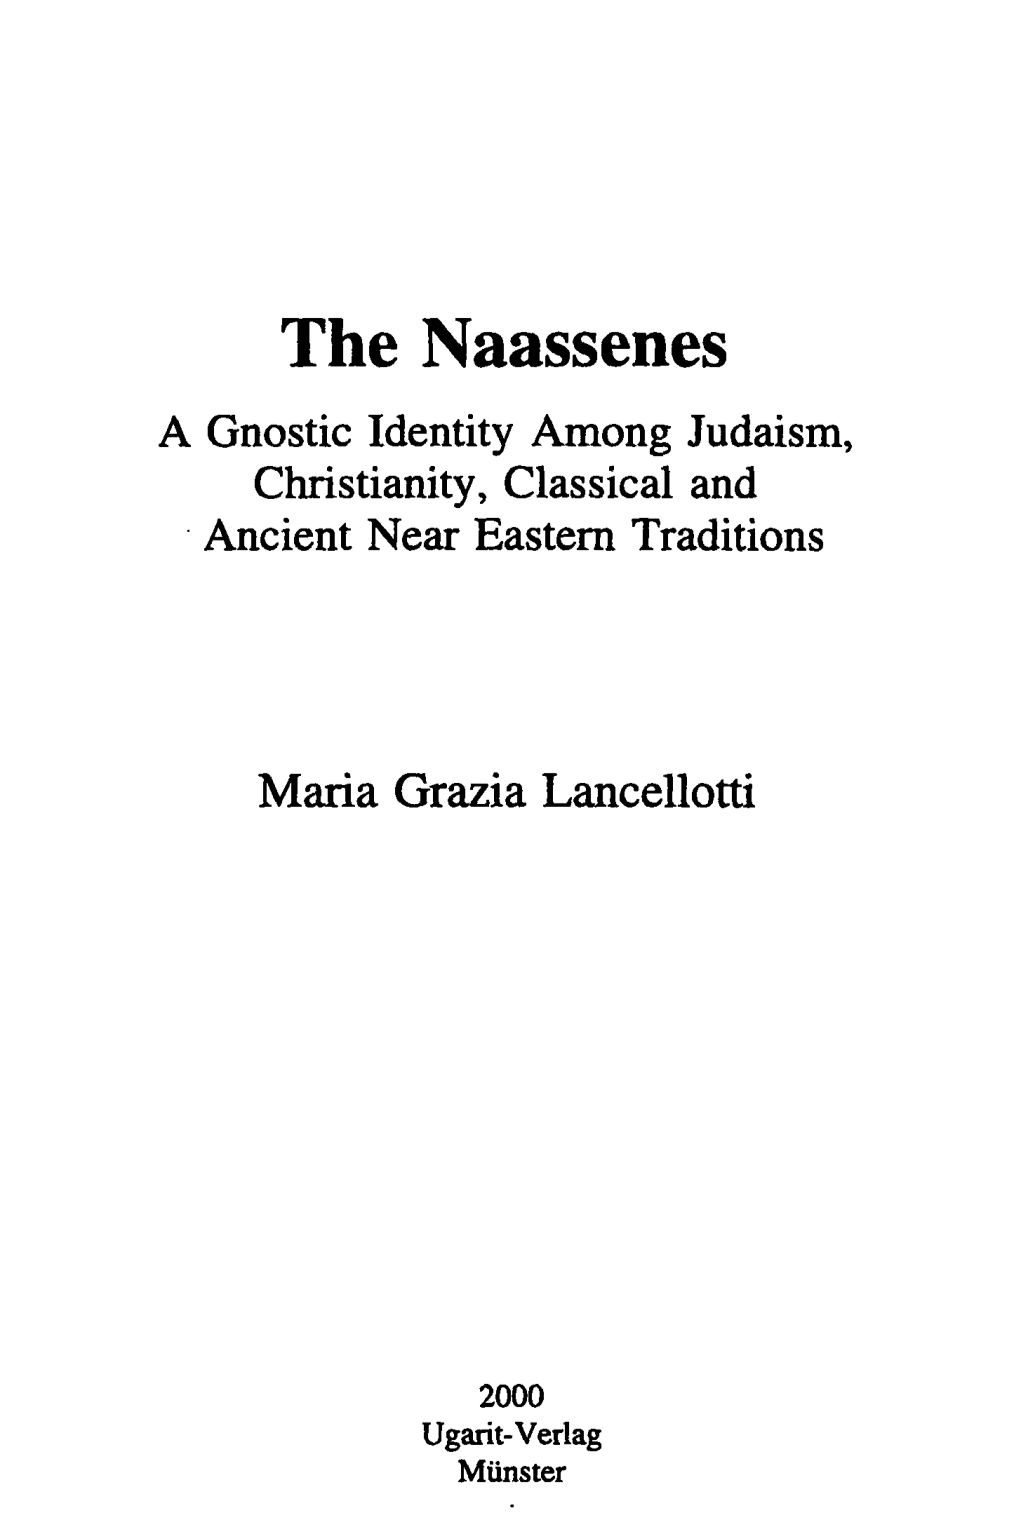 The Naassenes a Gnostic Identity Among Judaism, Christianity, Classical and Ancient Near Eastern Traditions